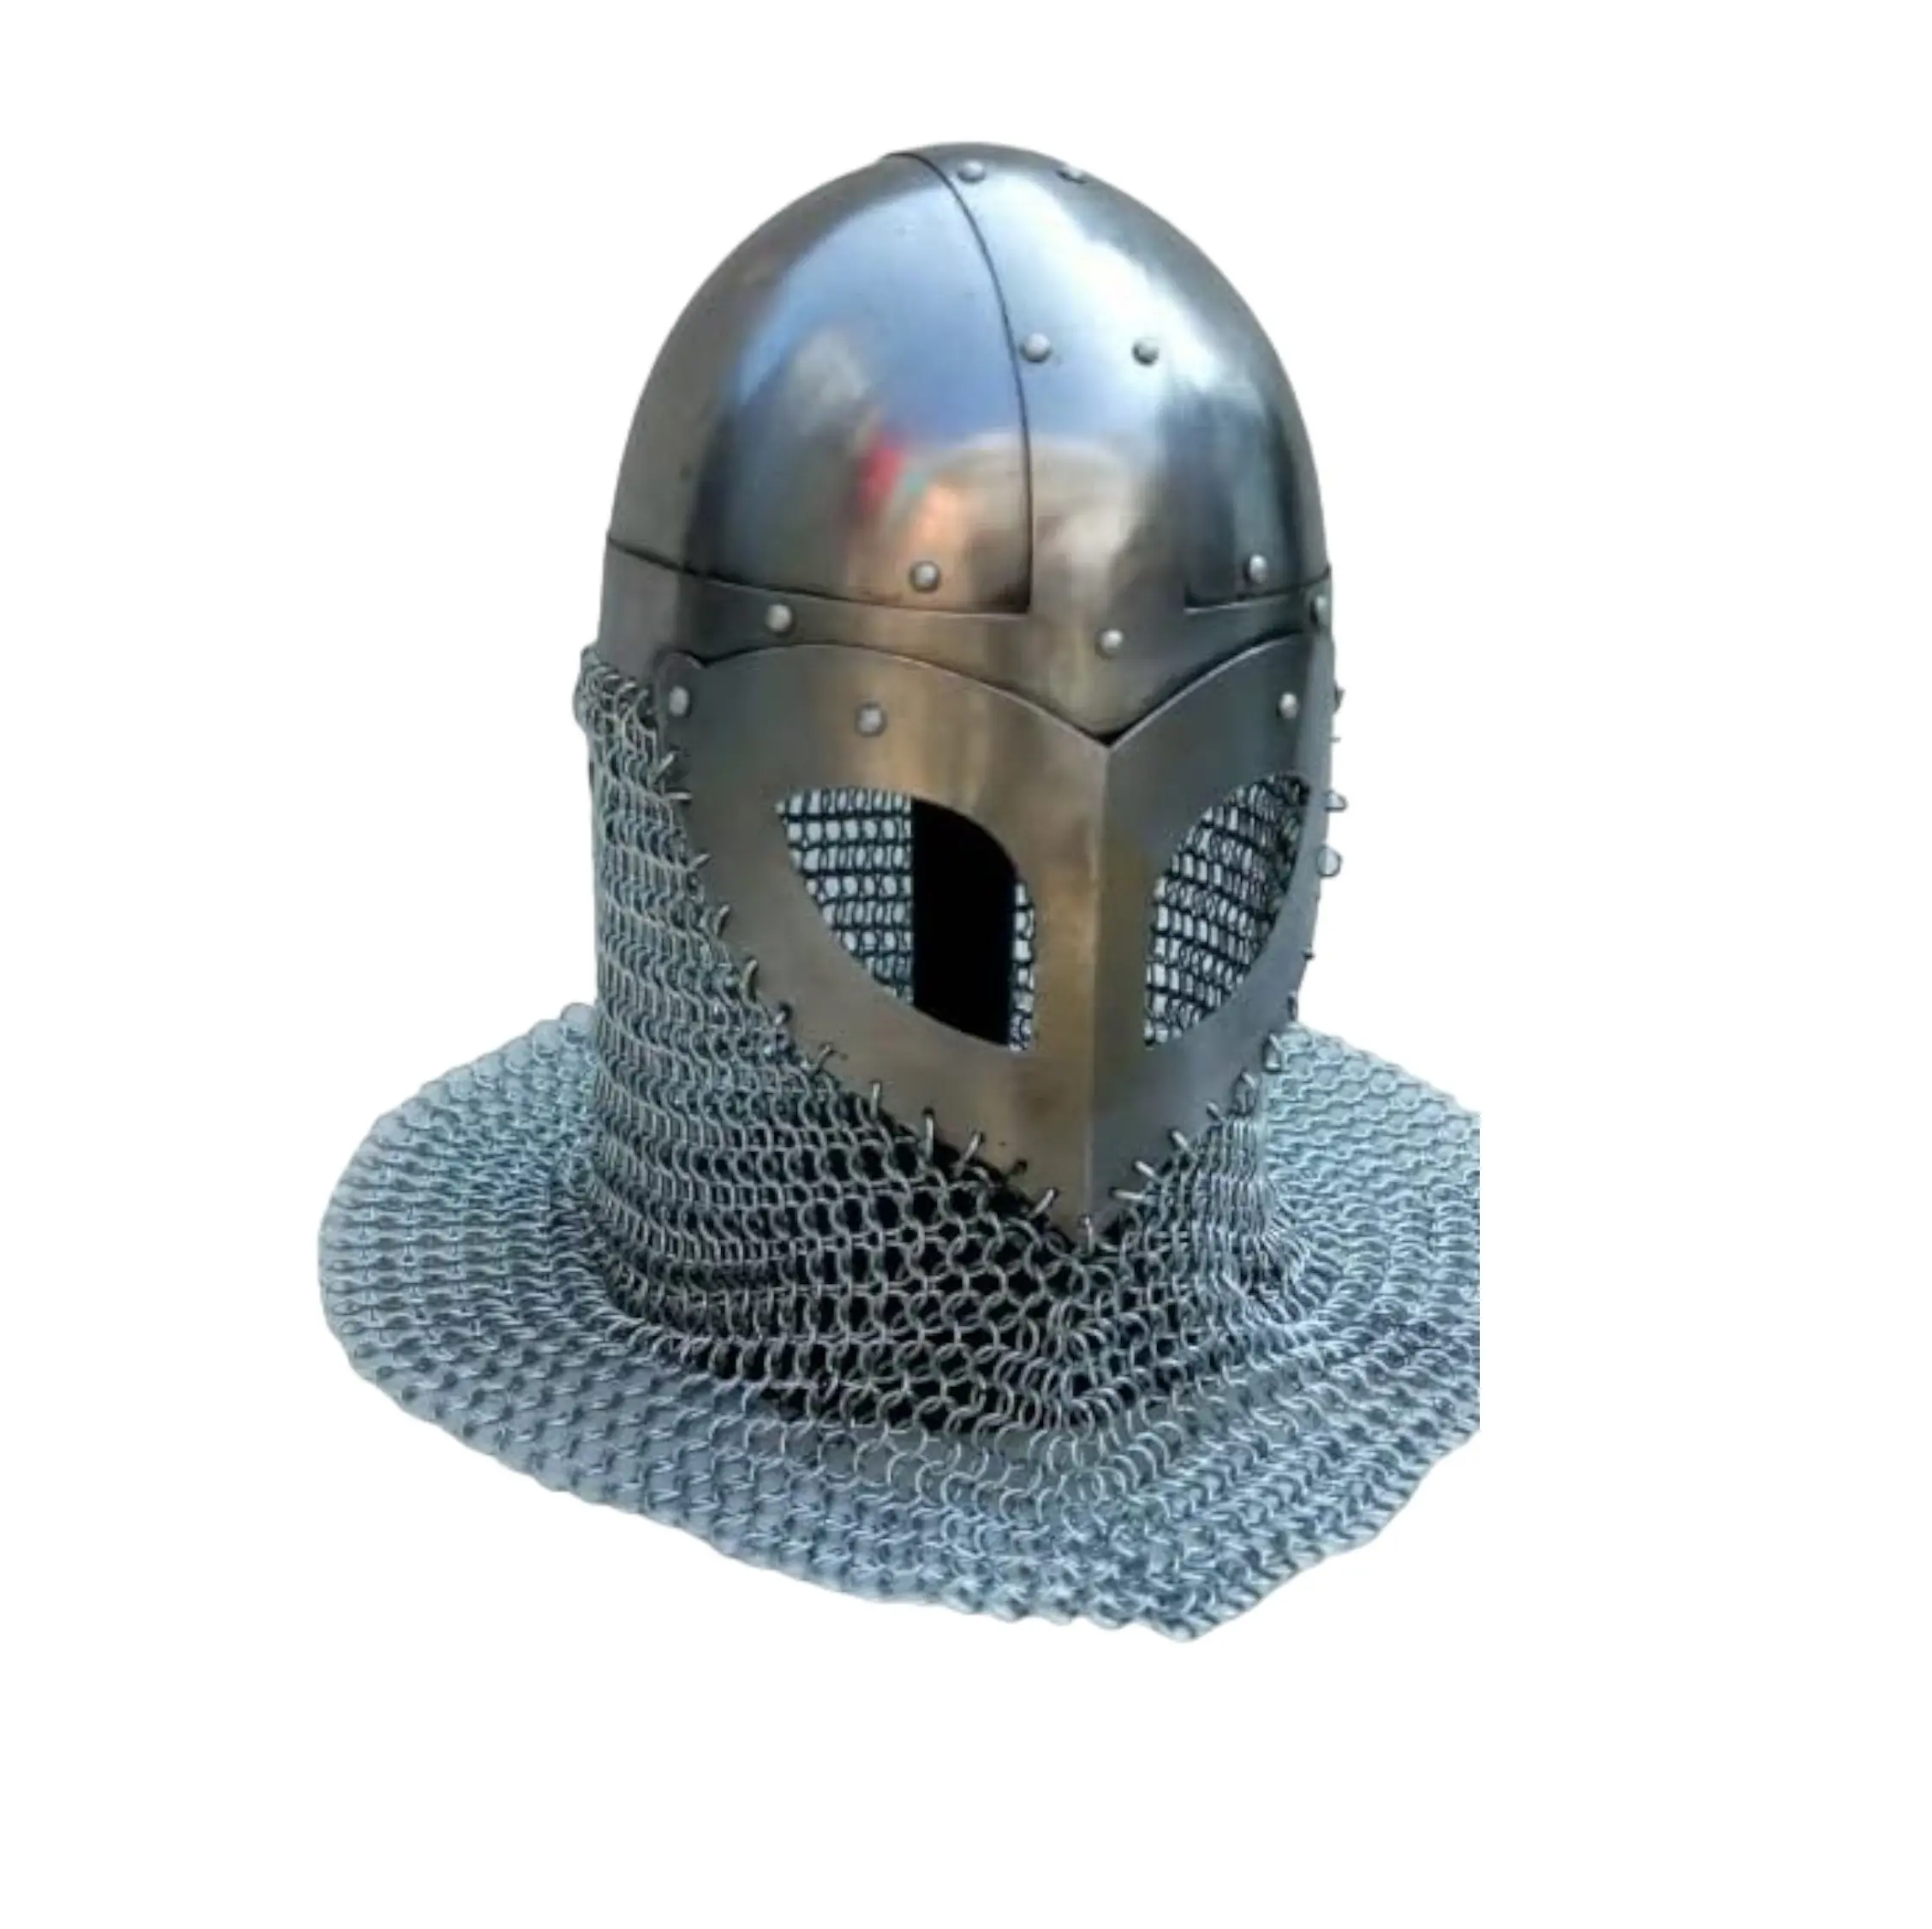 Medieval Helmet Viking Armour Helmet with Chain Mail Replica Armour Costume Medieval LARP Norman from India